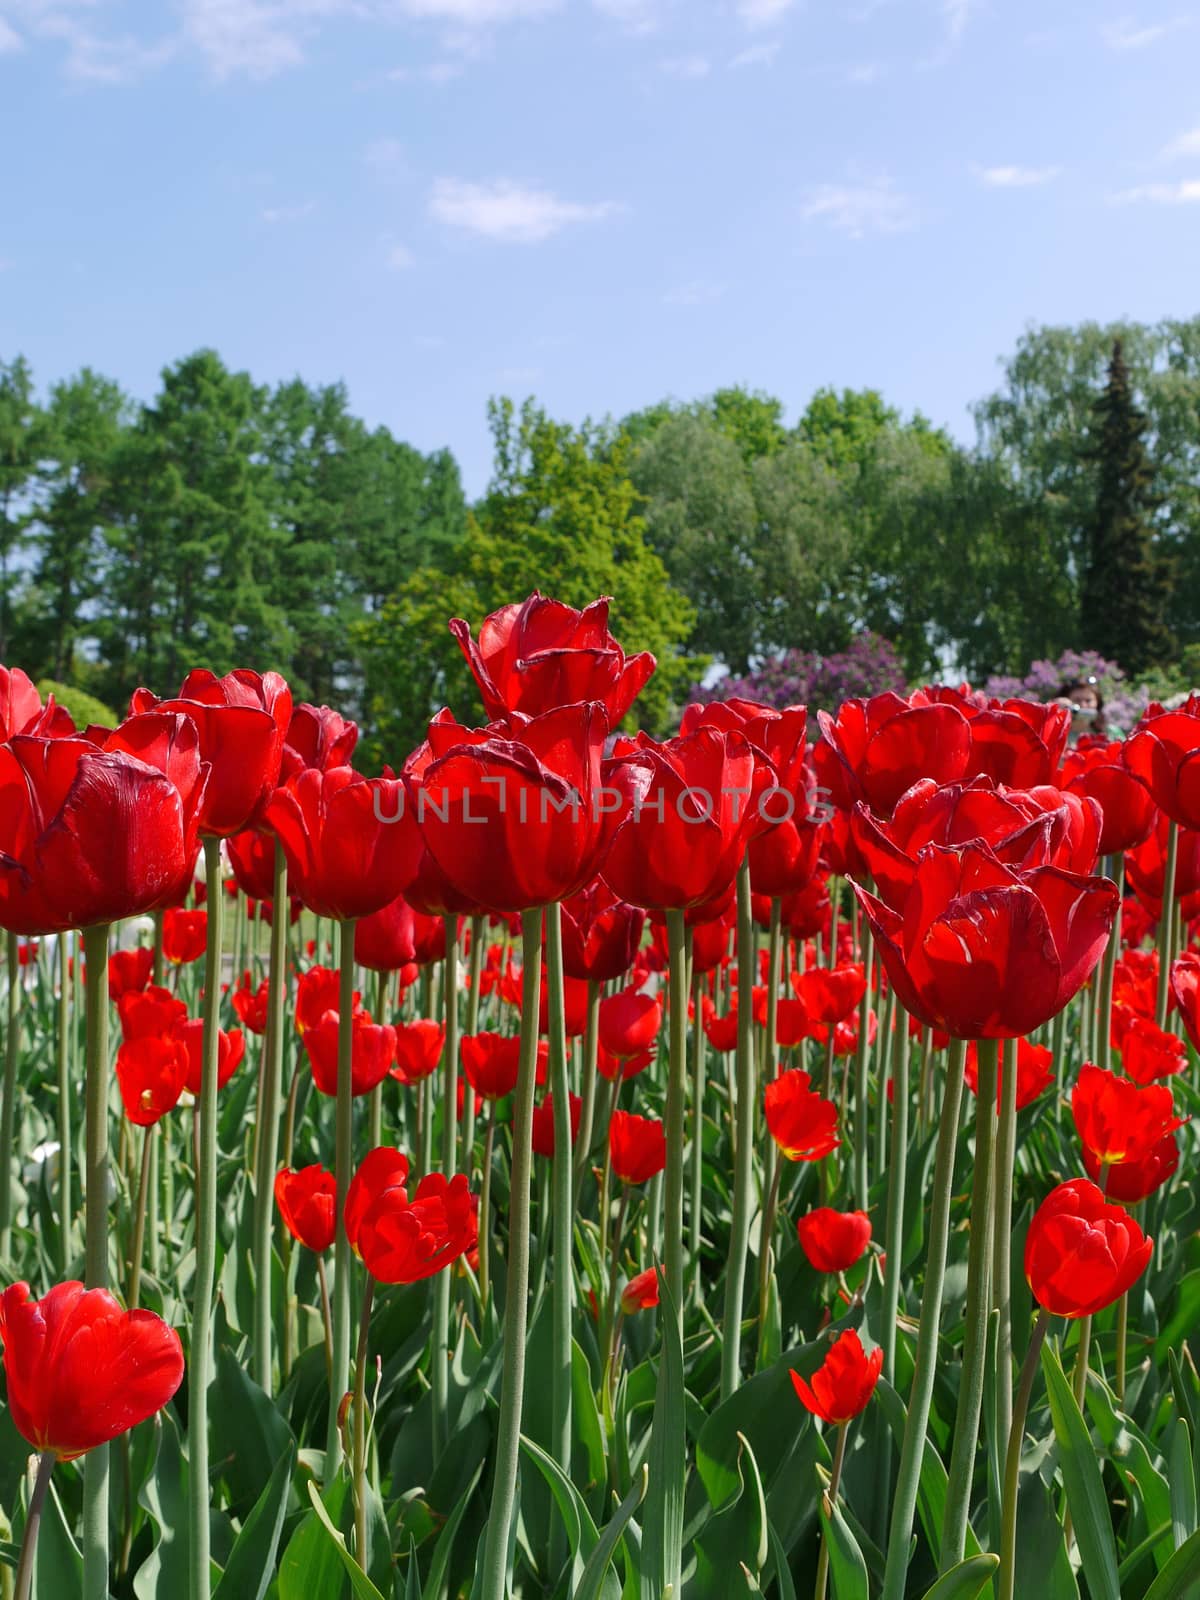 a beautiful palisade of red tulips with green stems against the background of the tops of trees and the blue sky